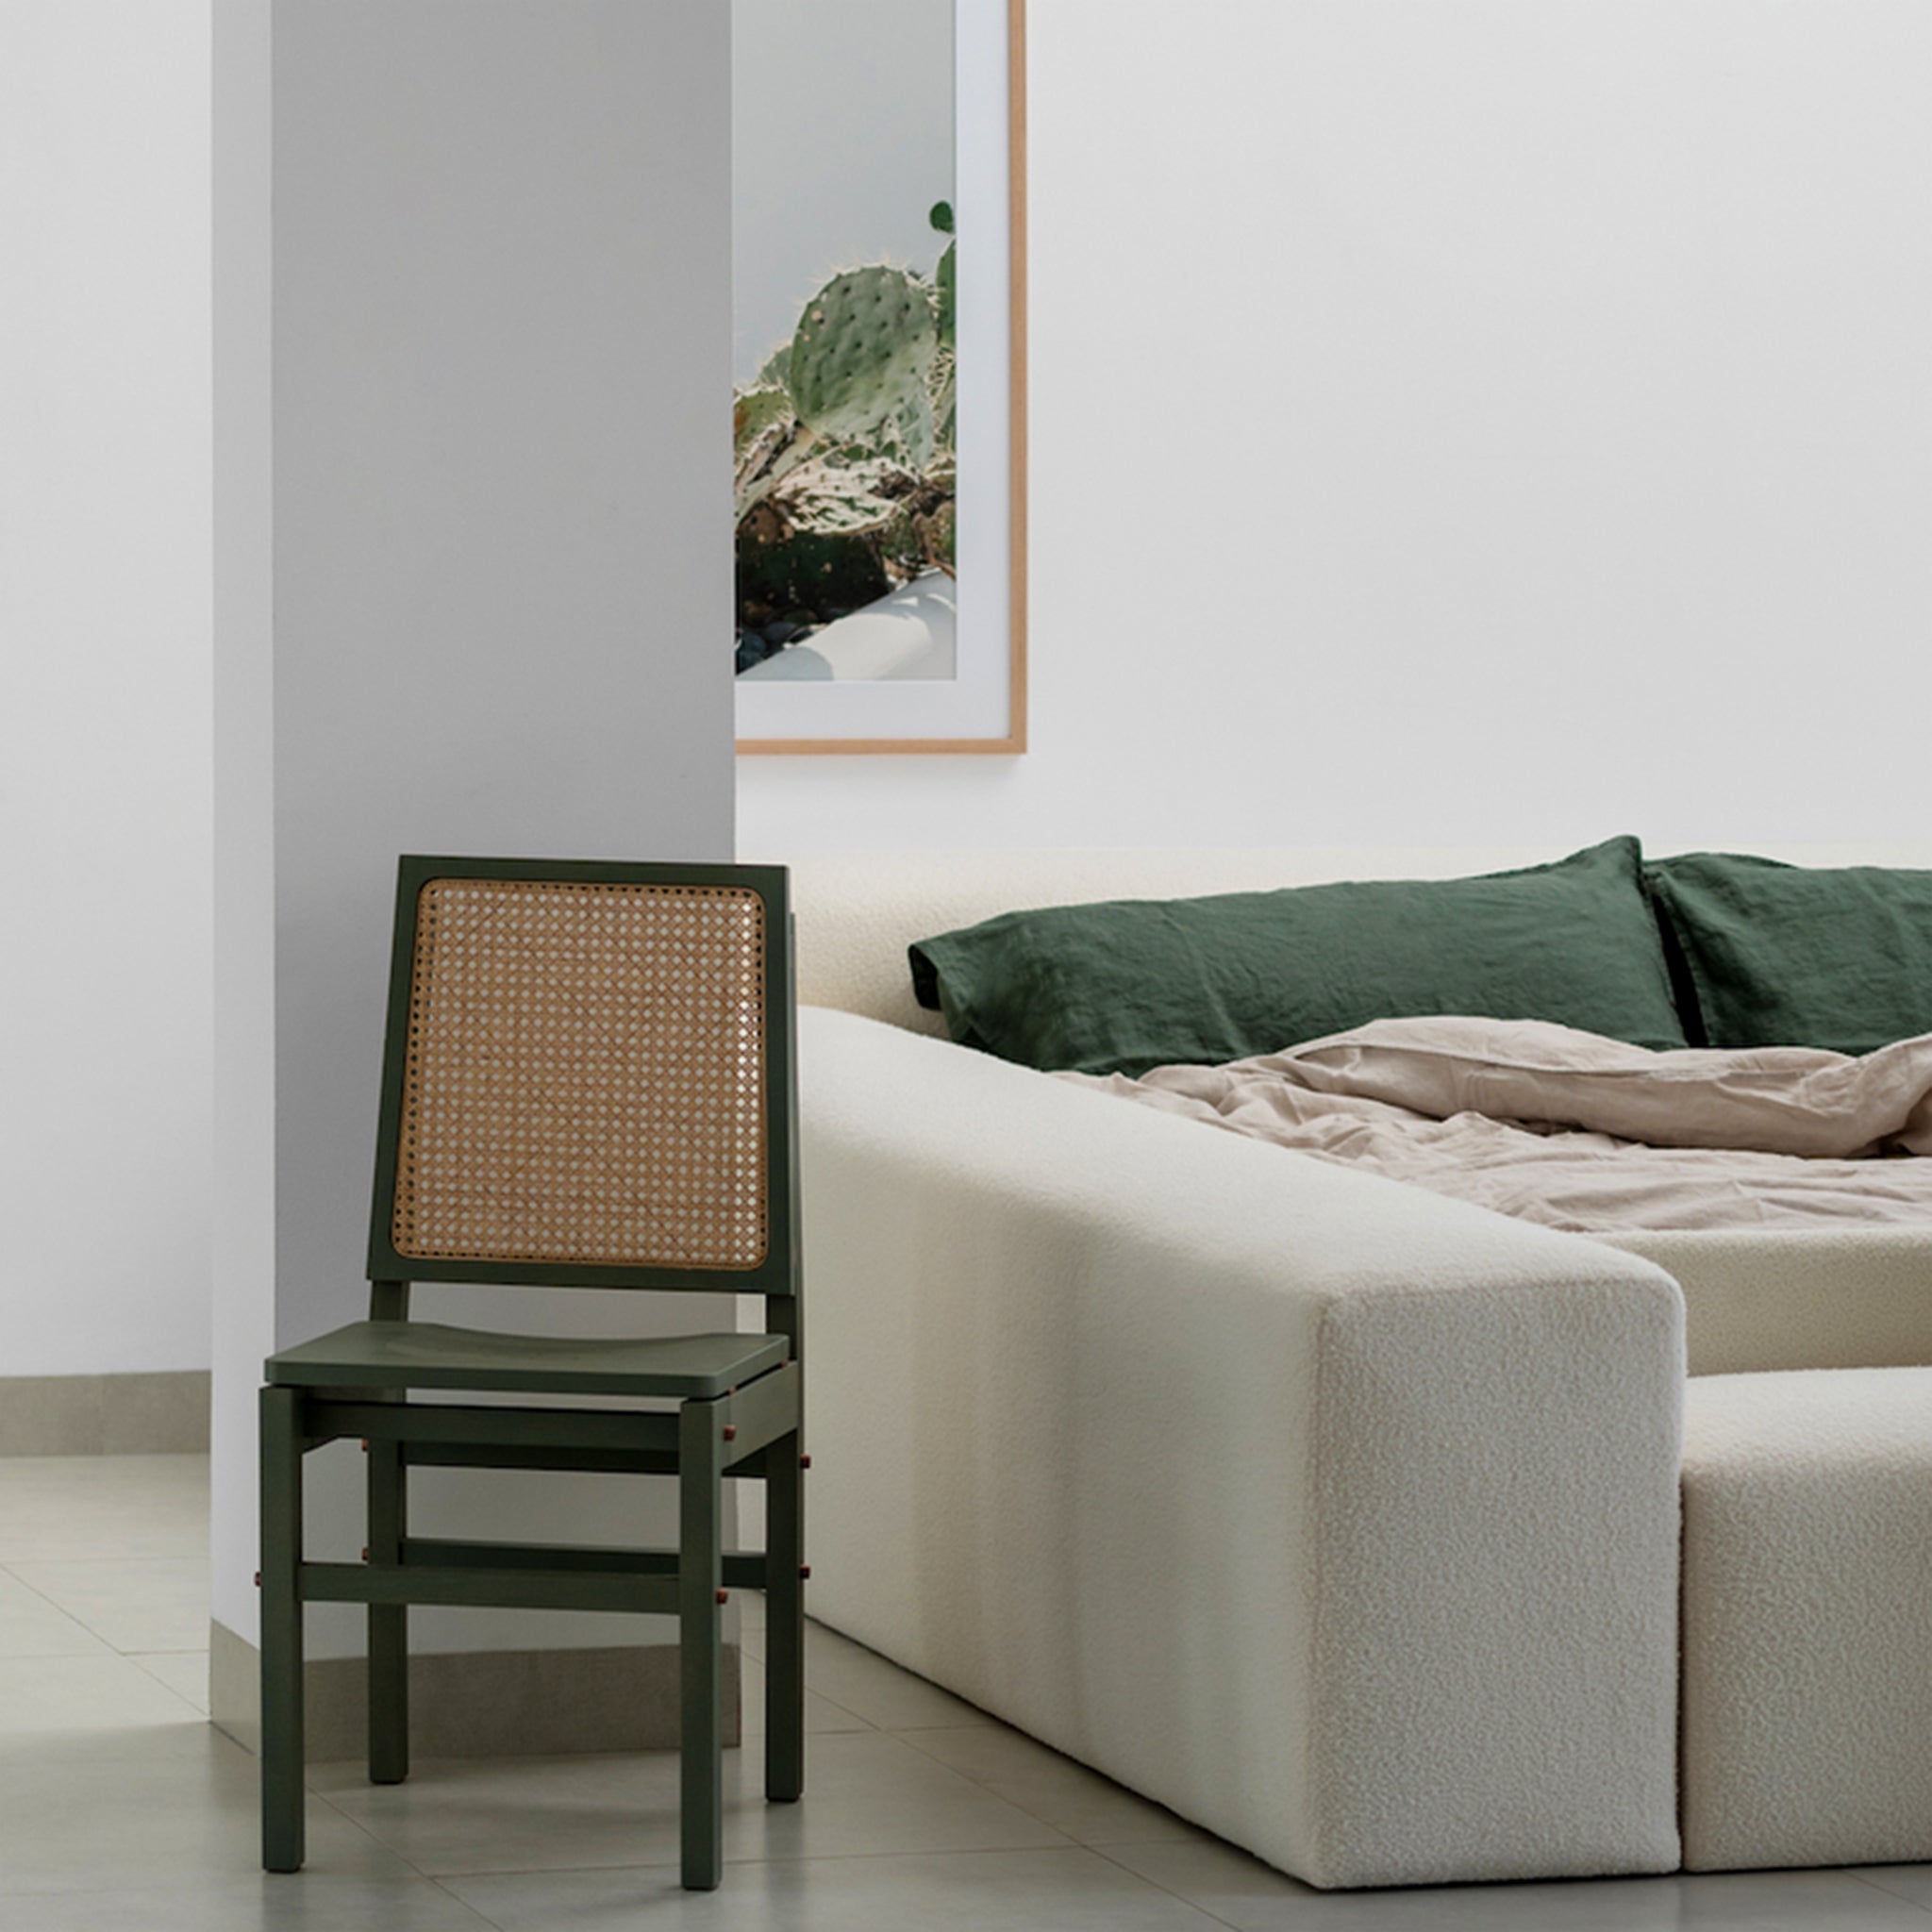 Plush gray king-size bed with biscuit-tufted upholstery and integrated benches on either side. The Heff Bed by Klettkic provides a space-saving solution for modern bedrooms, offering extra seating for reading, relaxing, or putting on shoes.